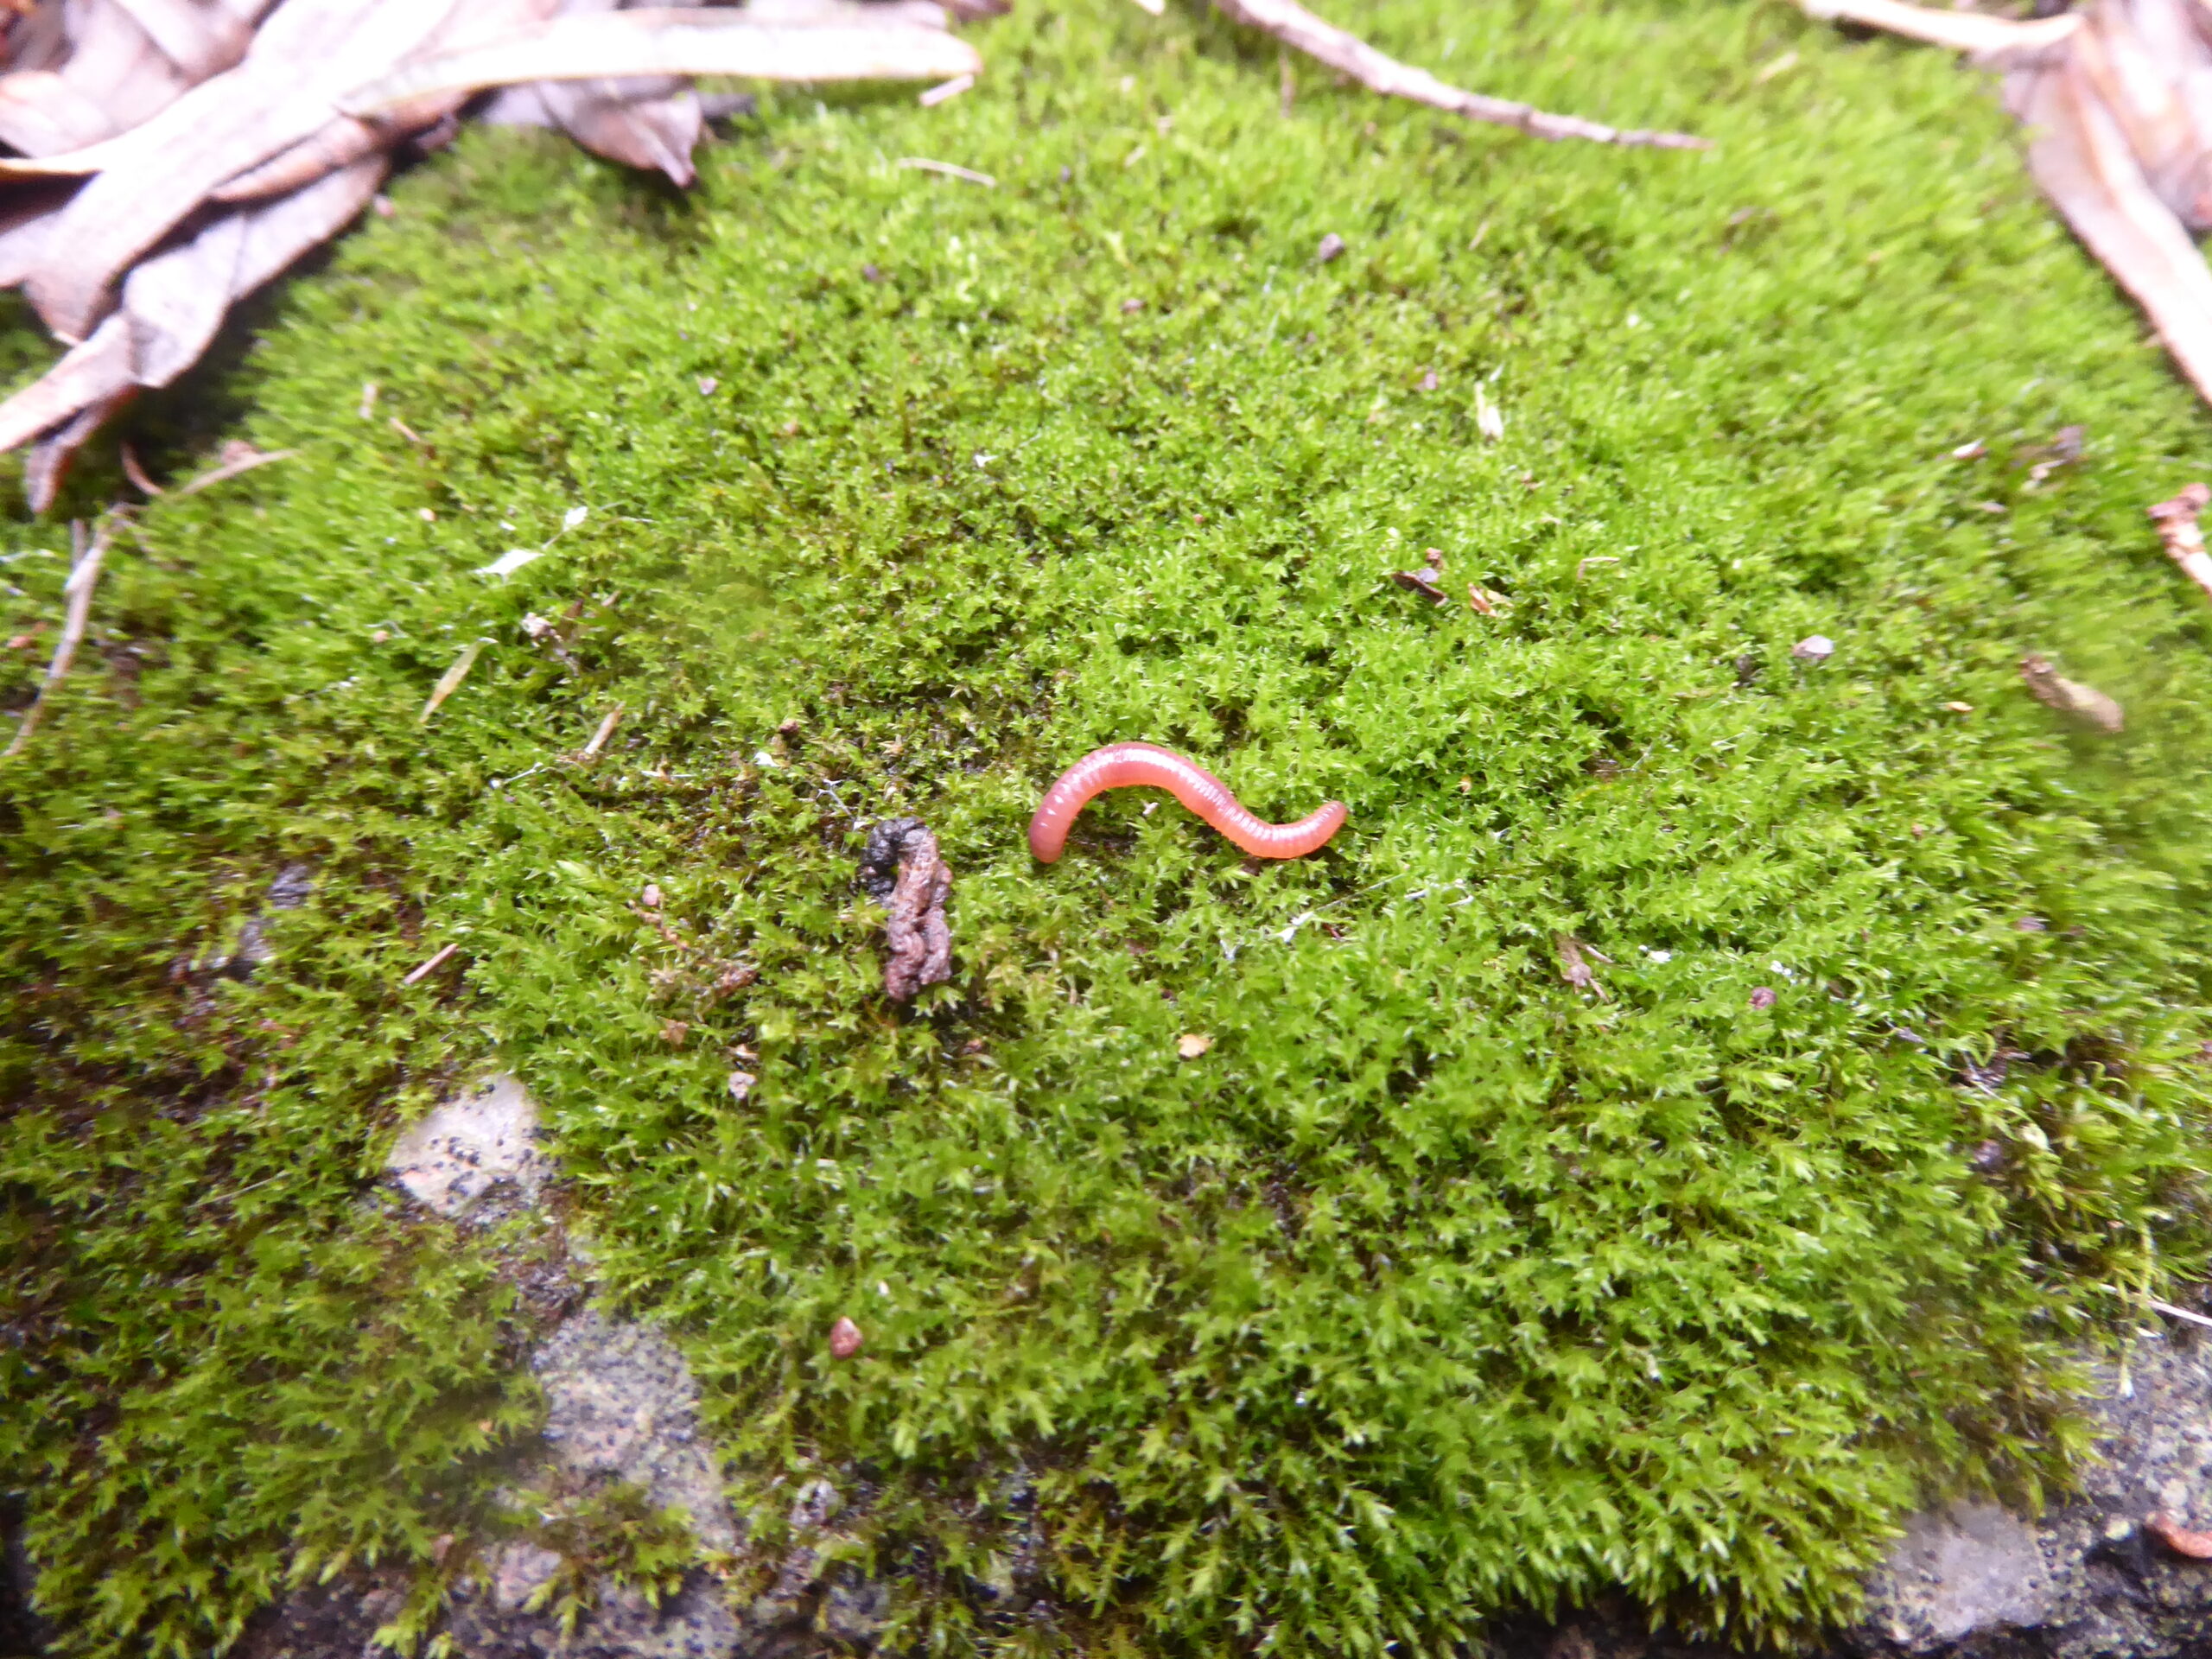 Earthworm and mosses